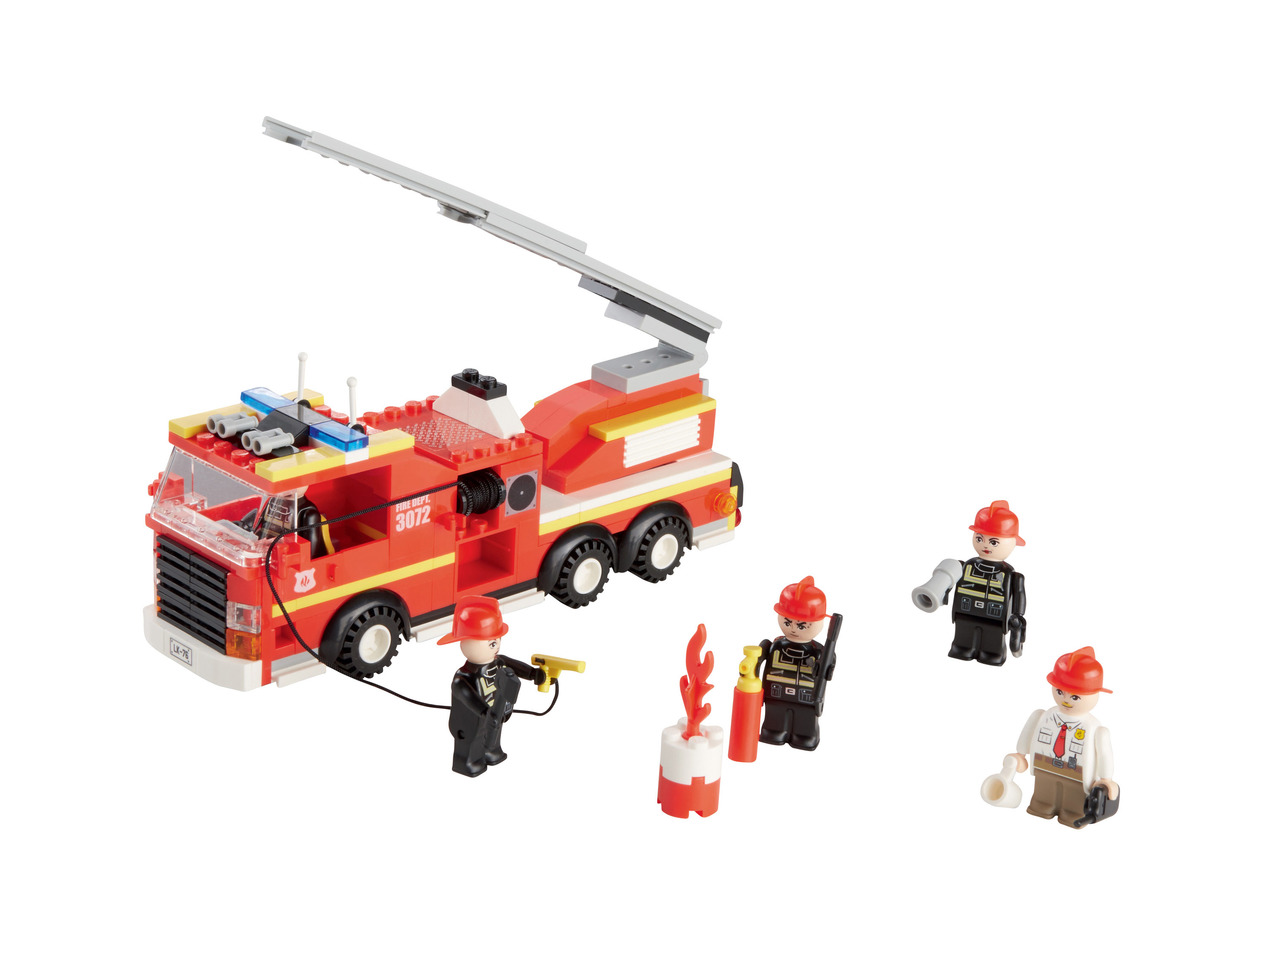 Kids' Construction Toy